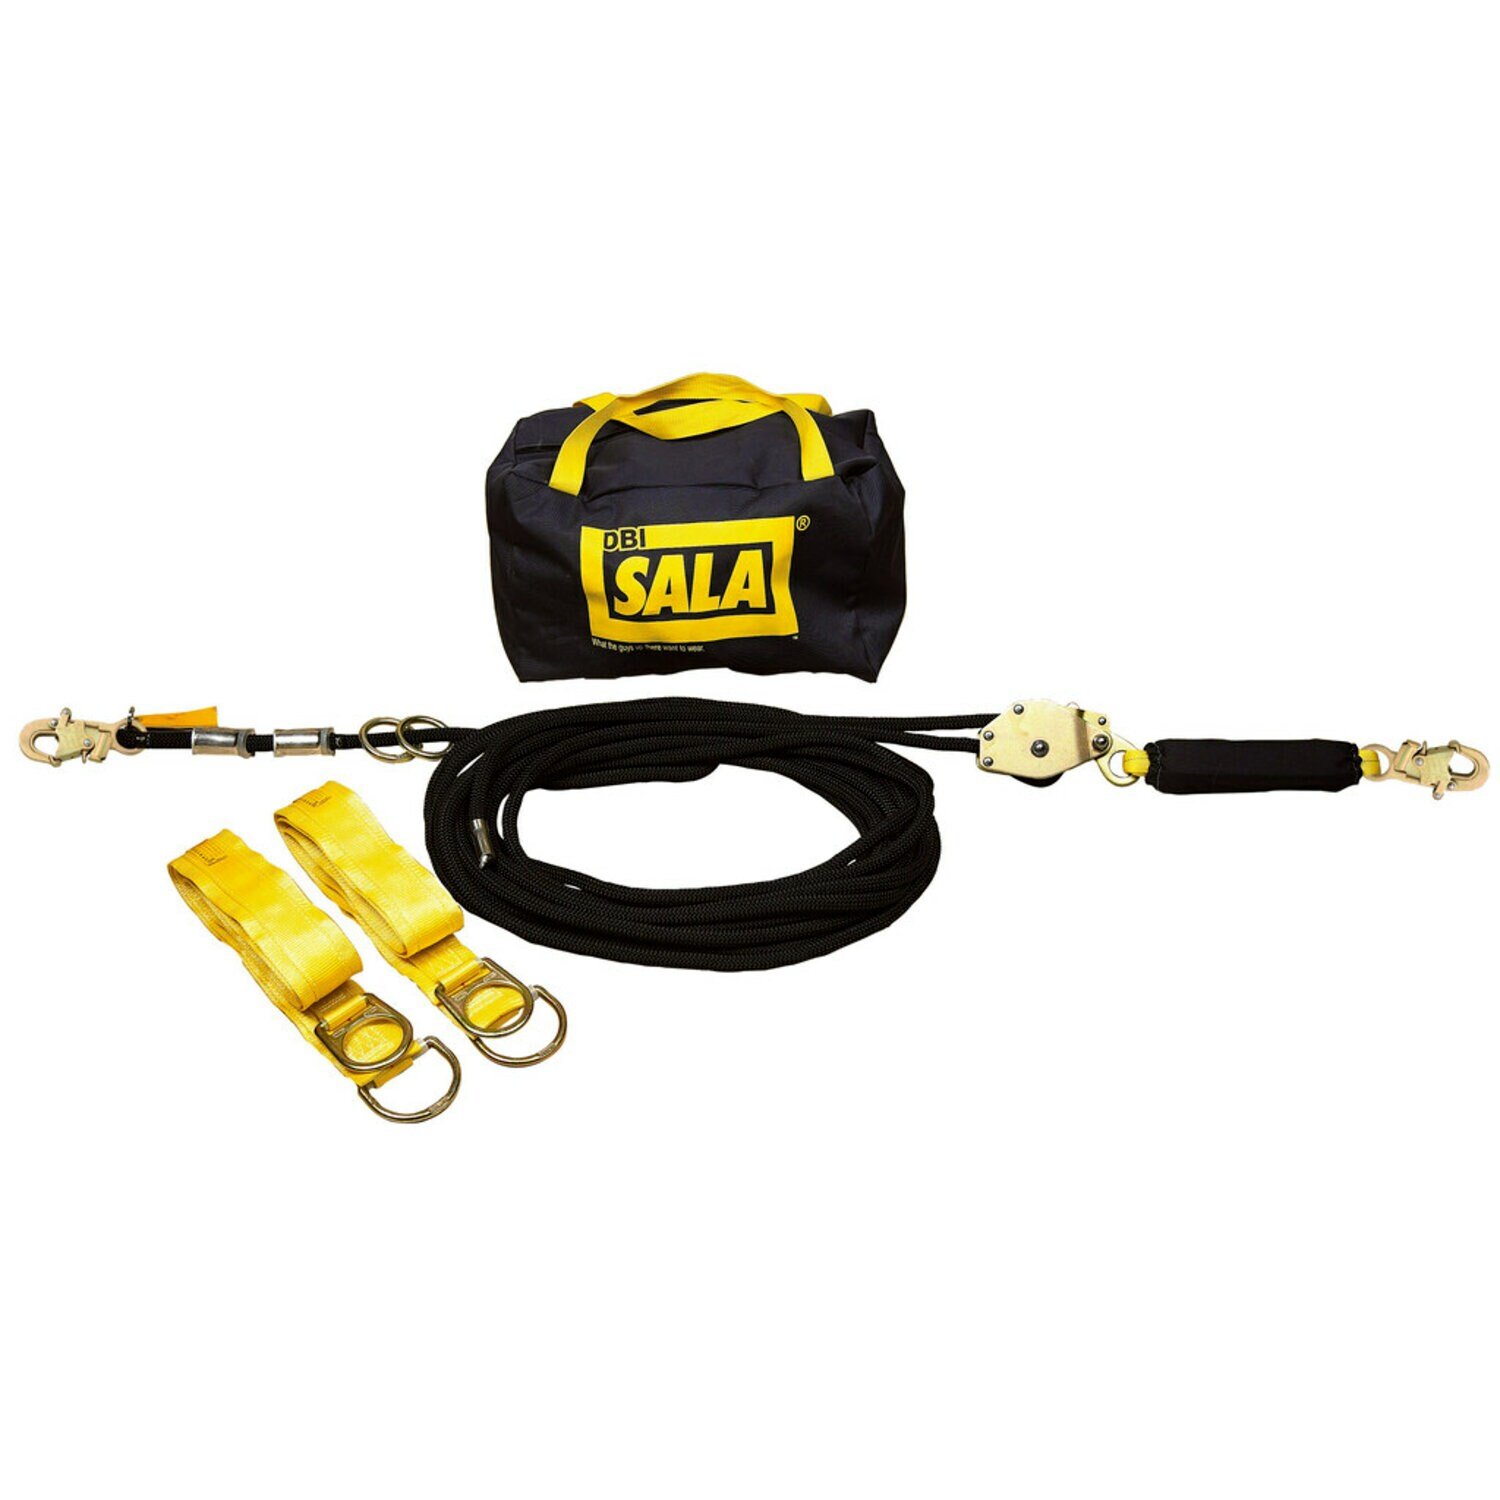 7012820308 - 3M DBI-SALA Temporary Horizontal Lifeline System with Anchors 7600706, 11/16 in Nylon Kernmantle Rope, 70 ft